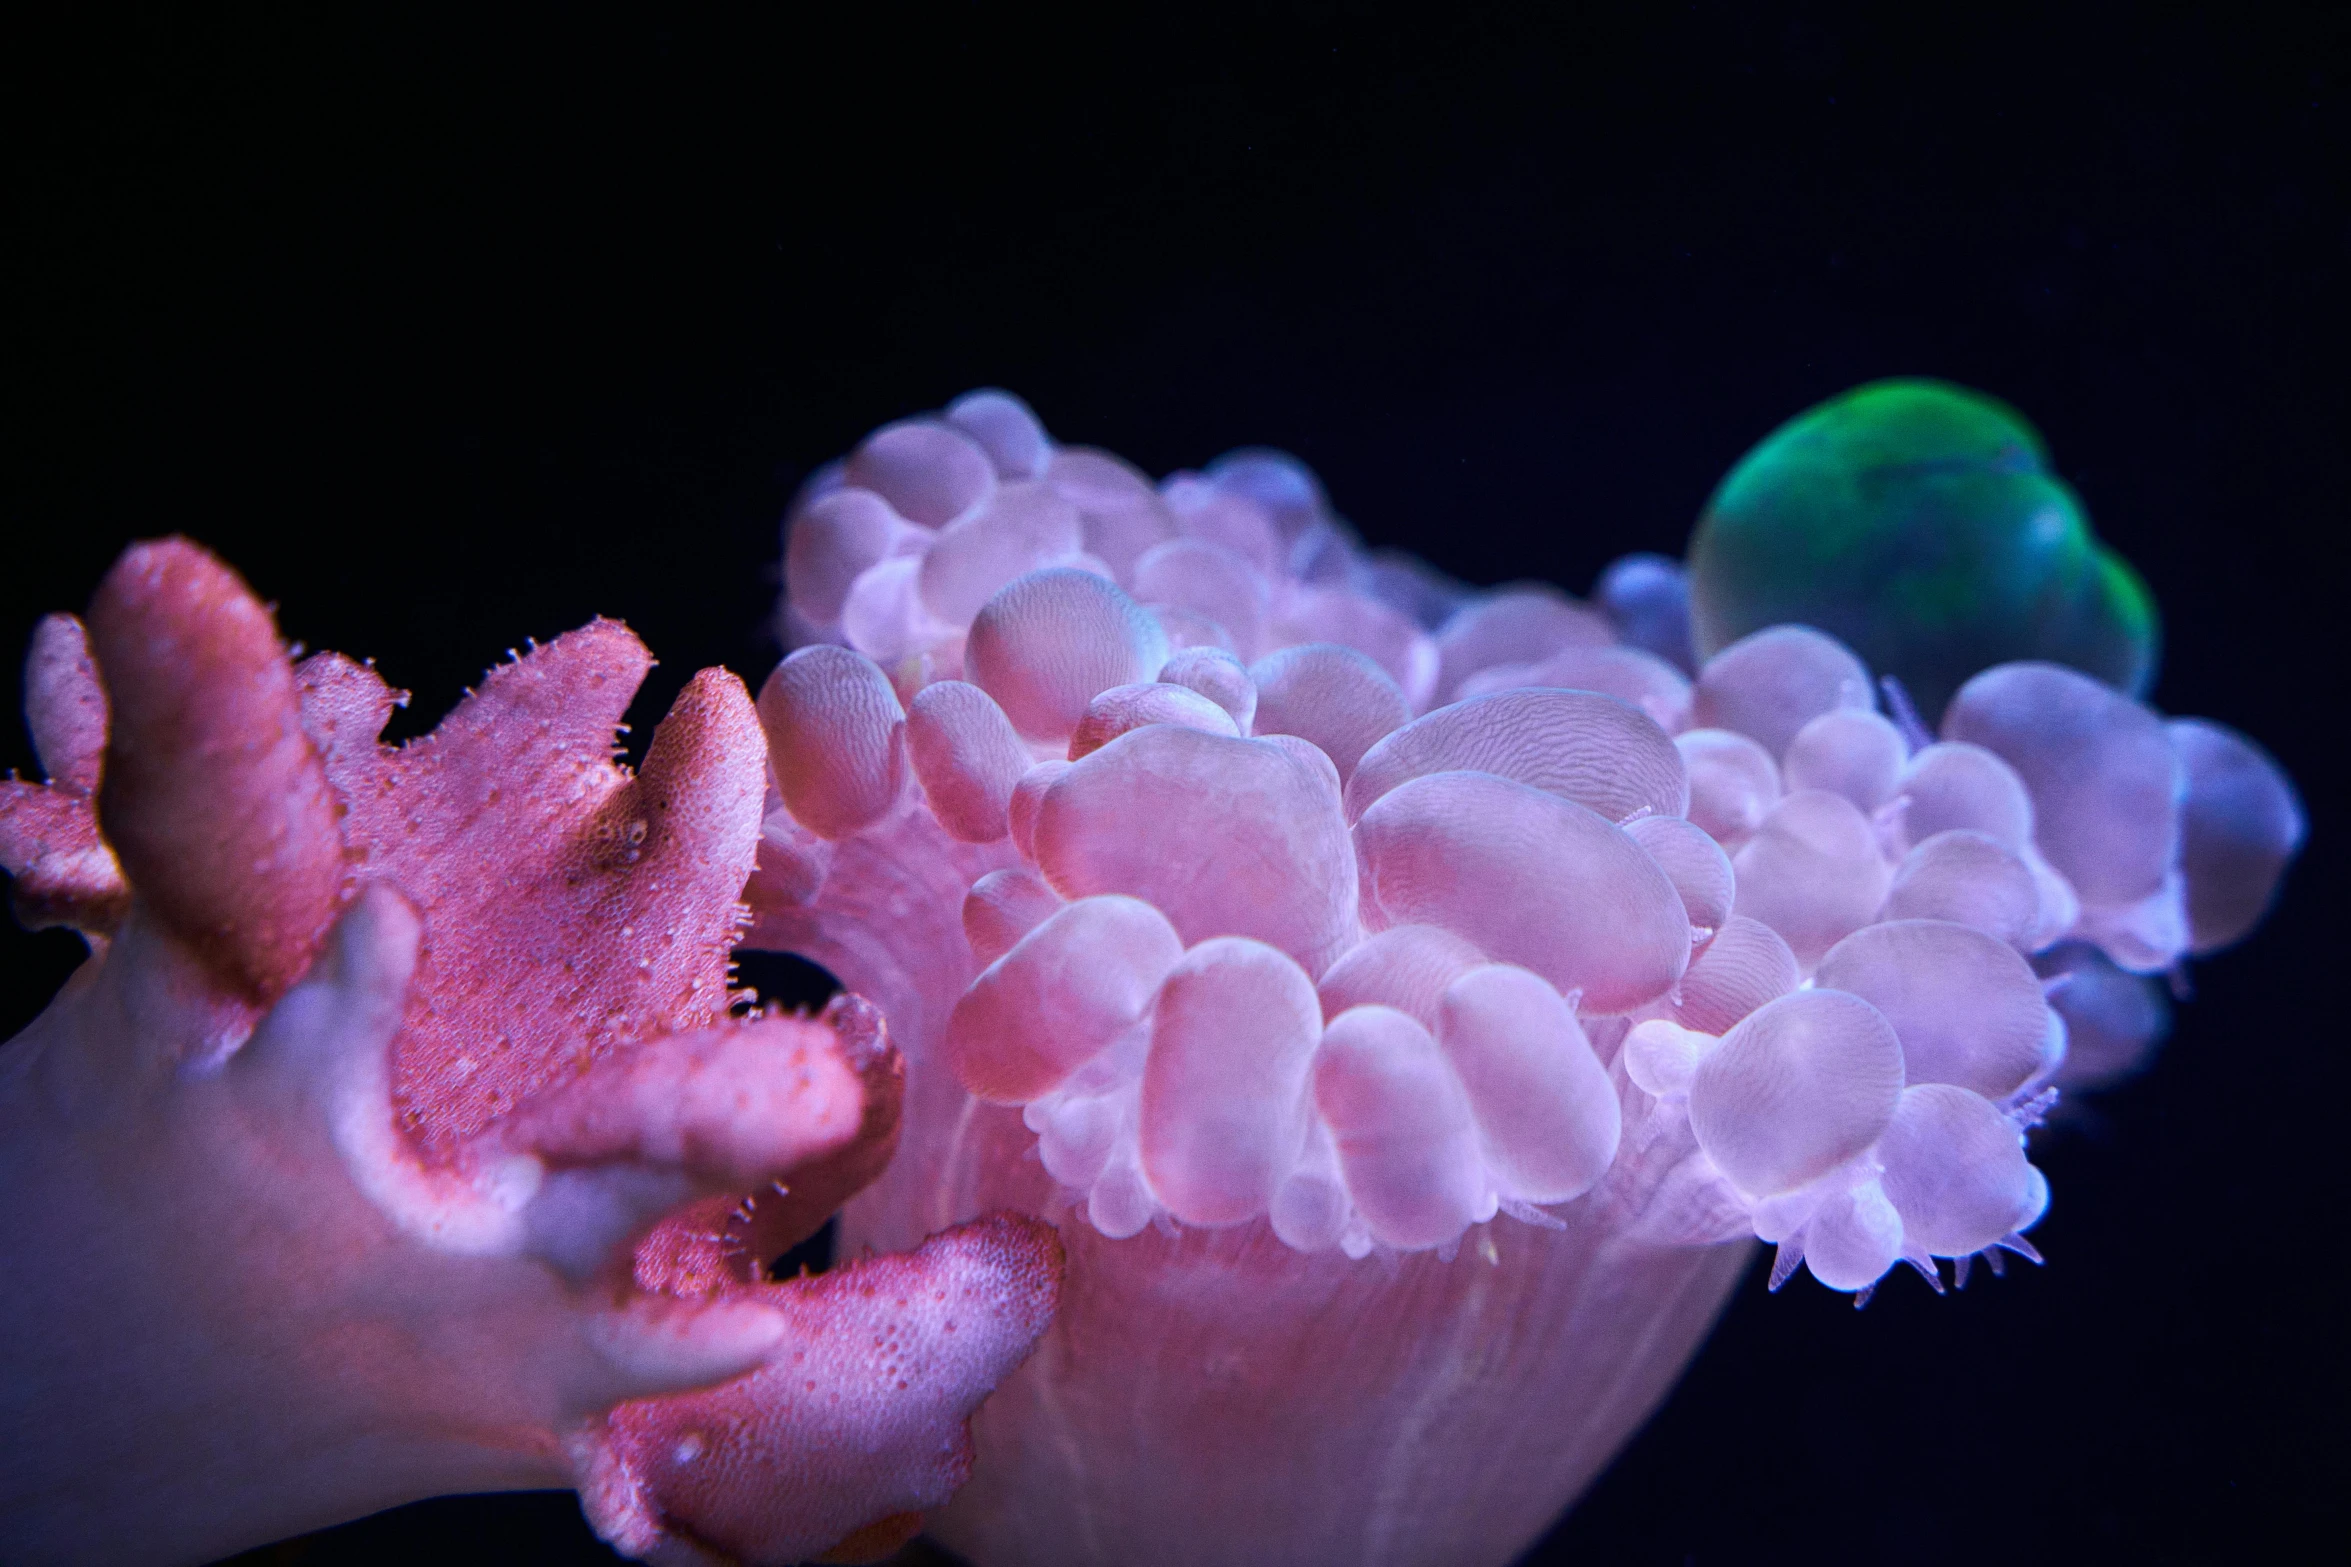 an orange and green jelly fish sitting on top of a pink sponge